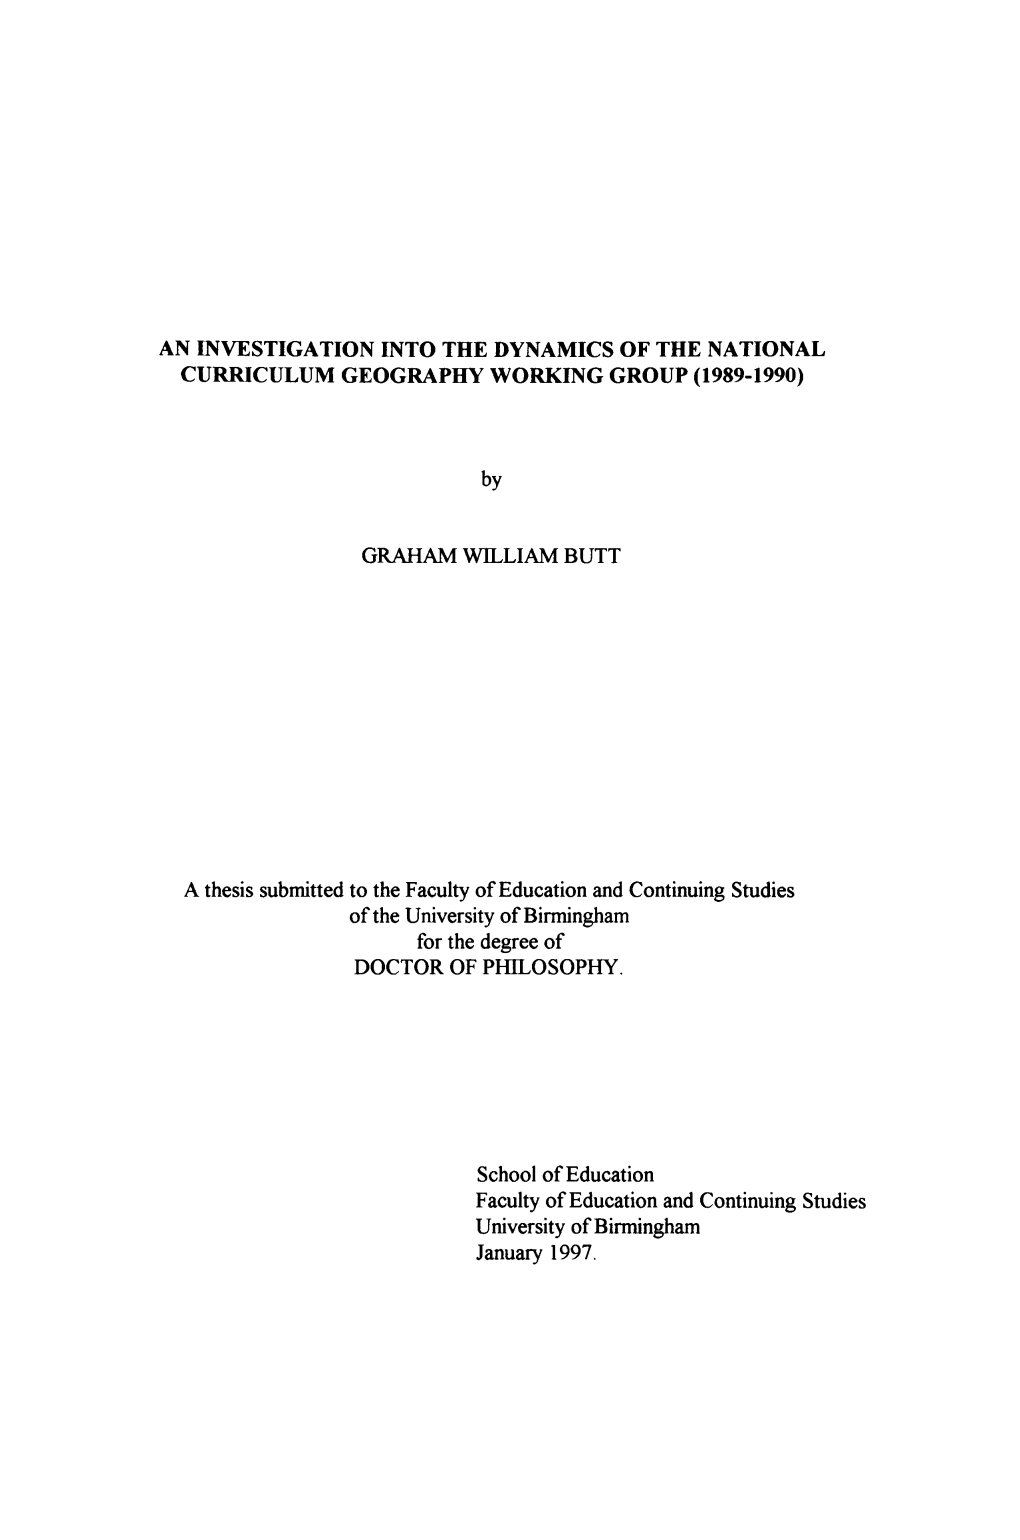 An Investigation Into the Dynamics of the National Curriculum Geography Working Group (1989-1990)